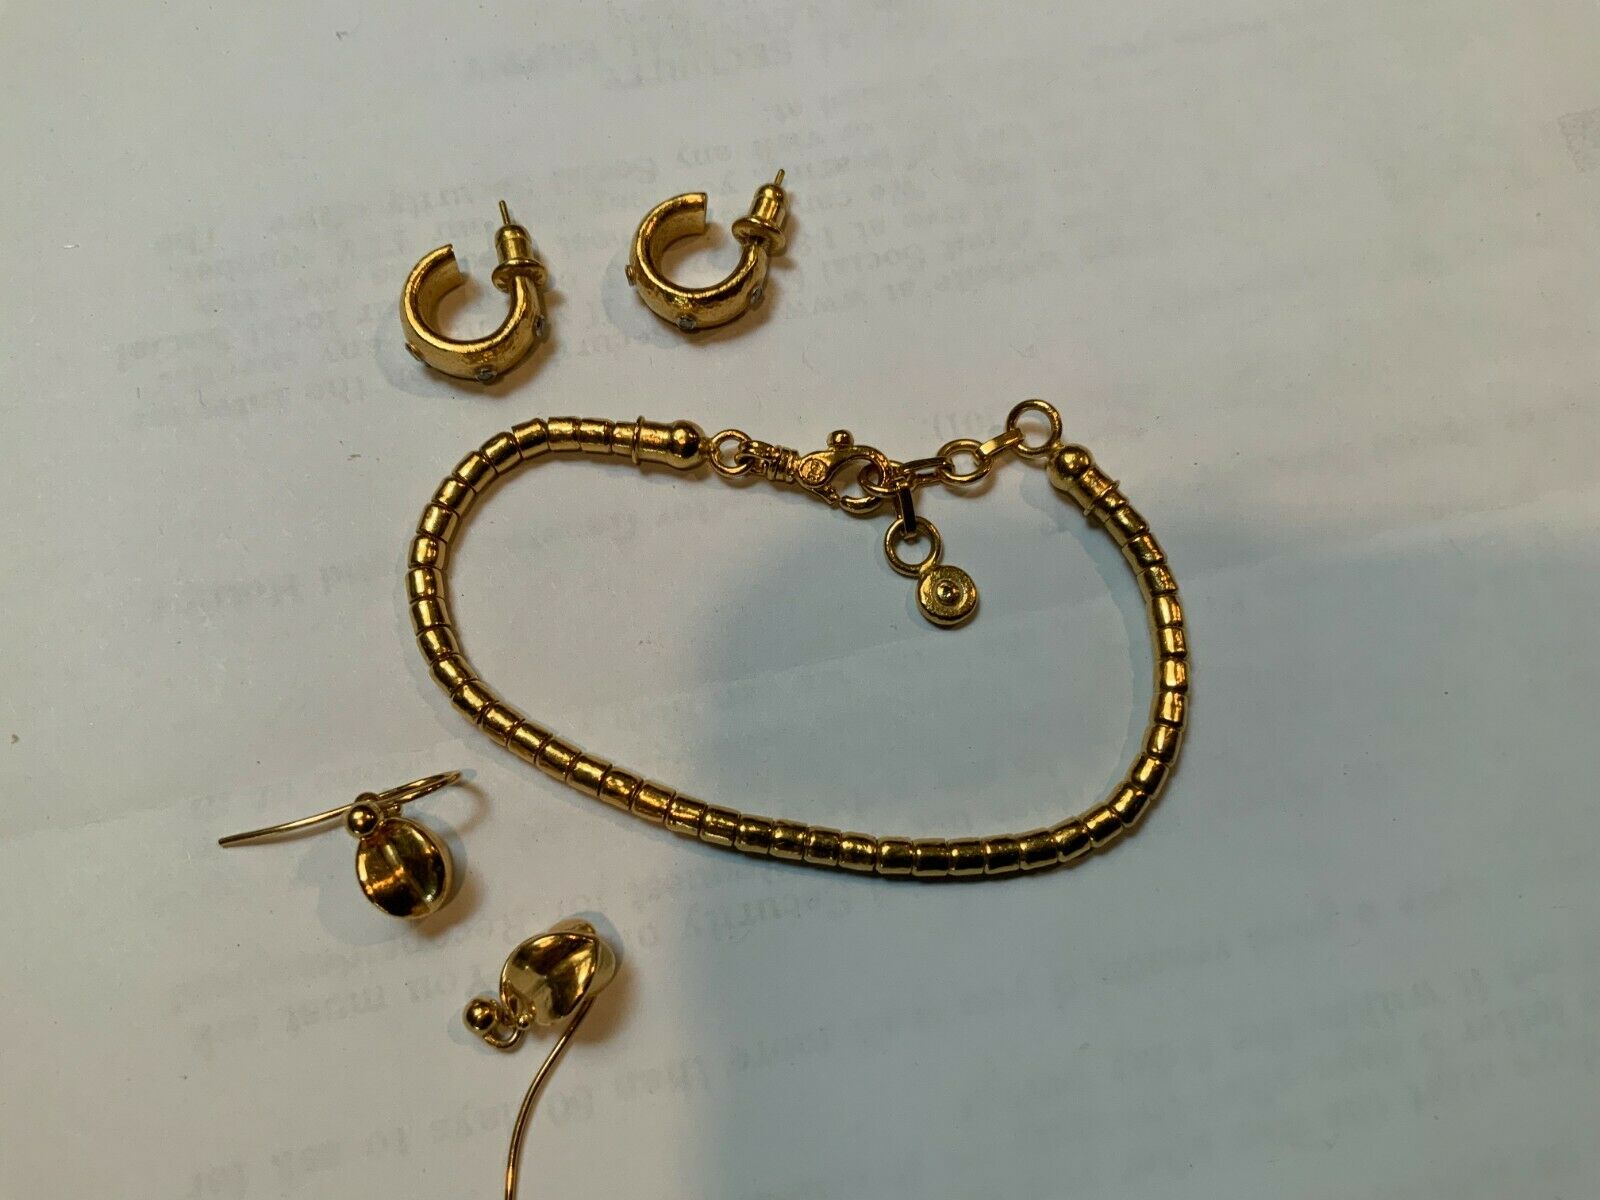 Gurhan 24k Solid Gold Bracelet And 2 Pairs Earrings.1 Pair Diams,1 Pair Without.